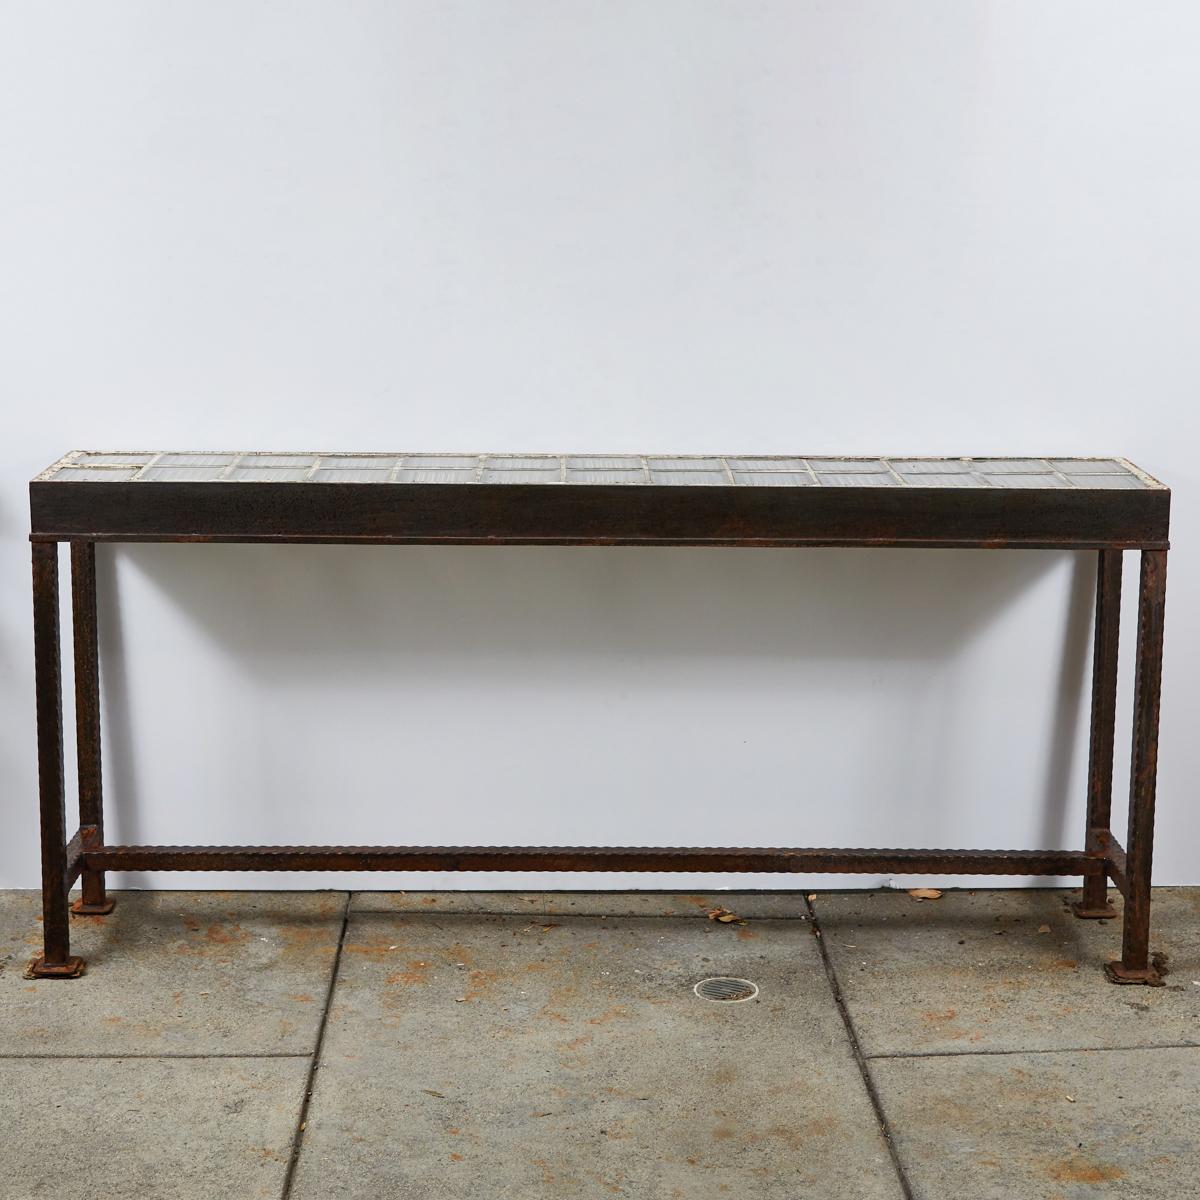 Mid-century iron console table with top made from vintage clear glass tiles. The tiles are square, lightly striated, and affixed in two rows with a cream-colored grout. The supportive iron framework has a smooth rectangular frieze and four straight,